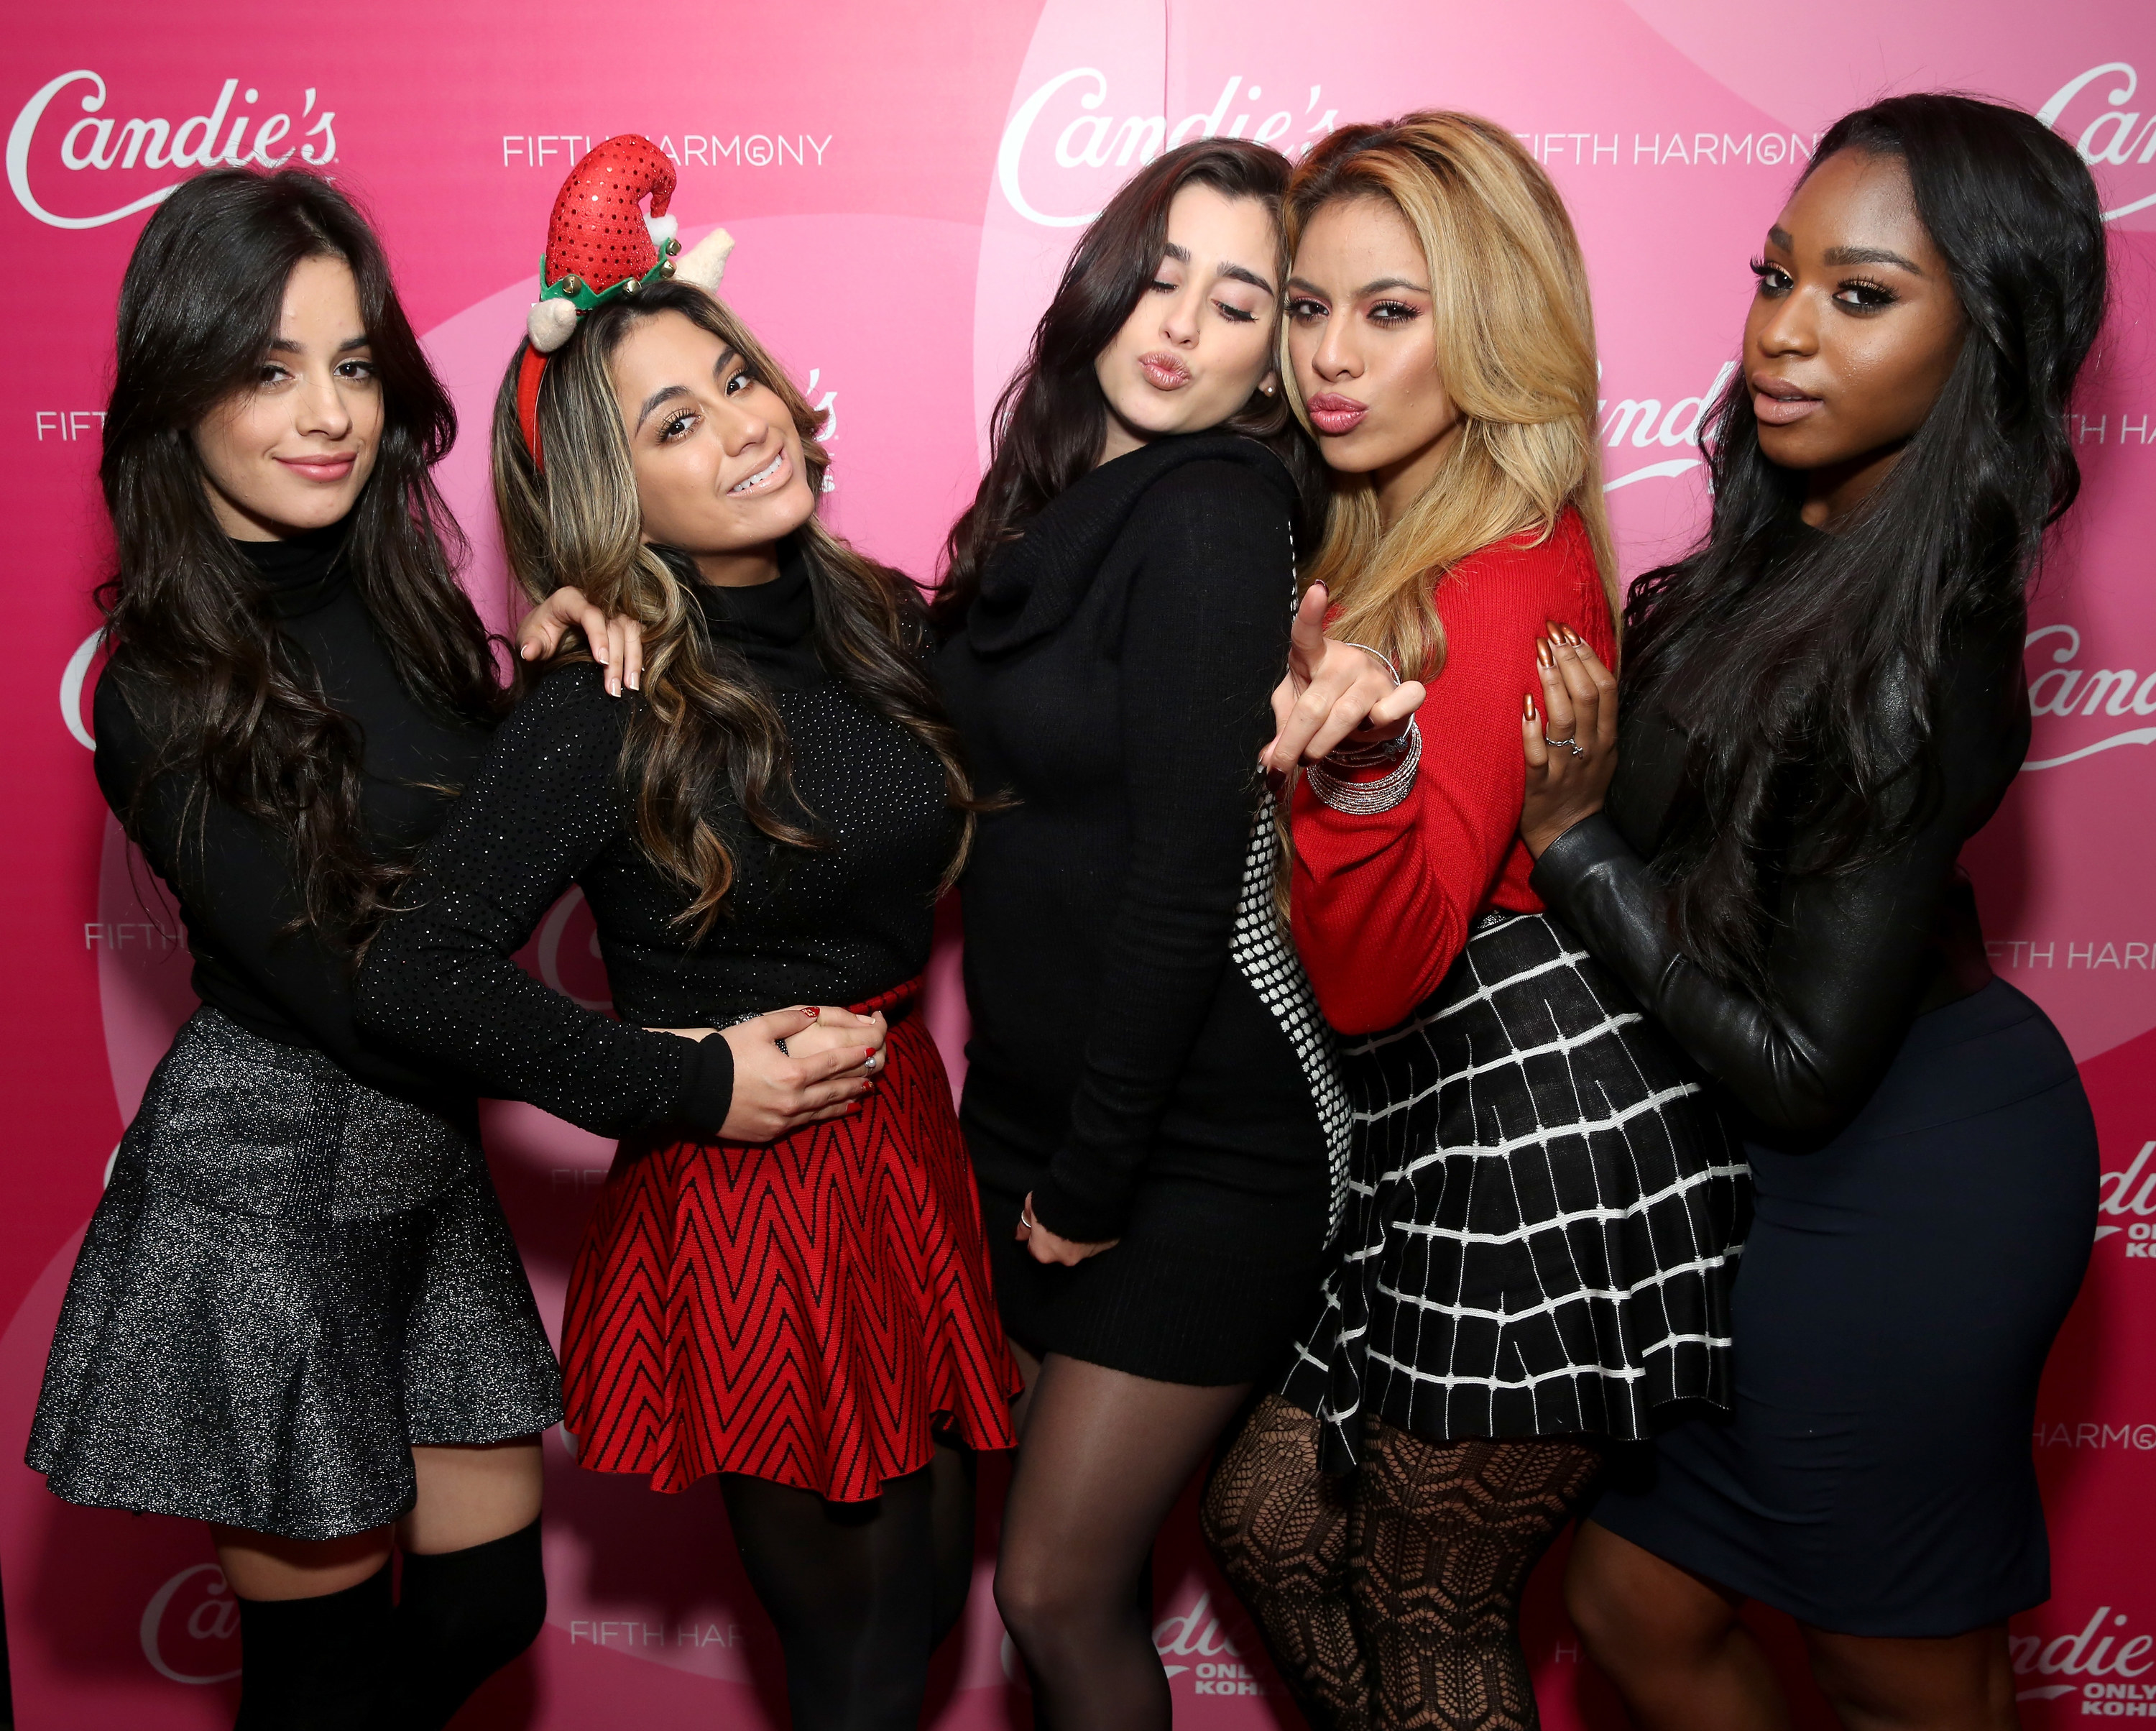 Fifth Harmony blow kisses at an event